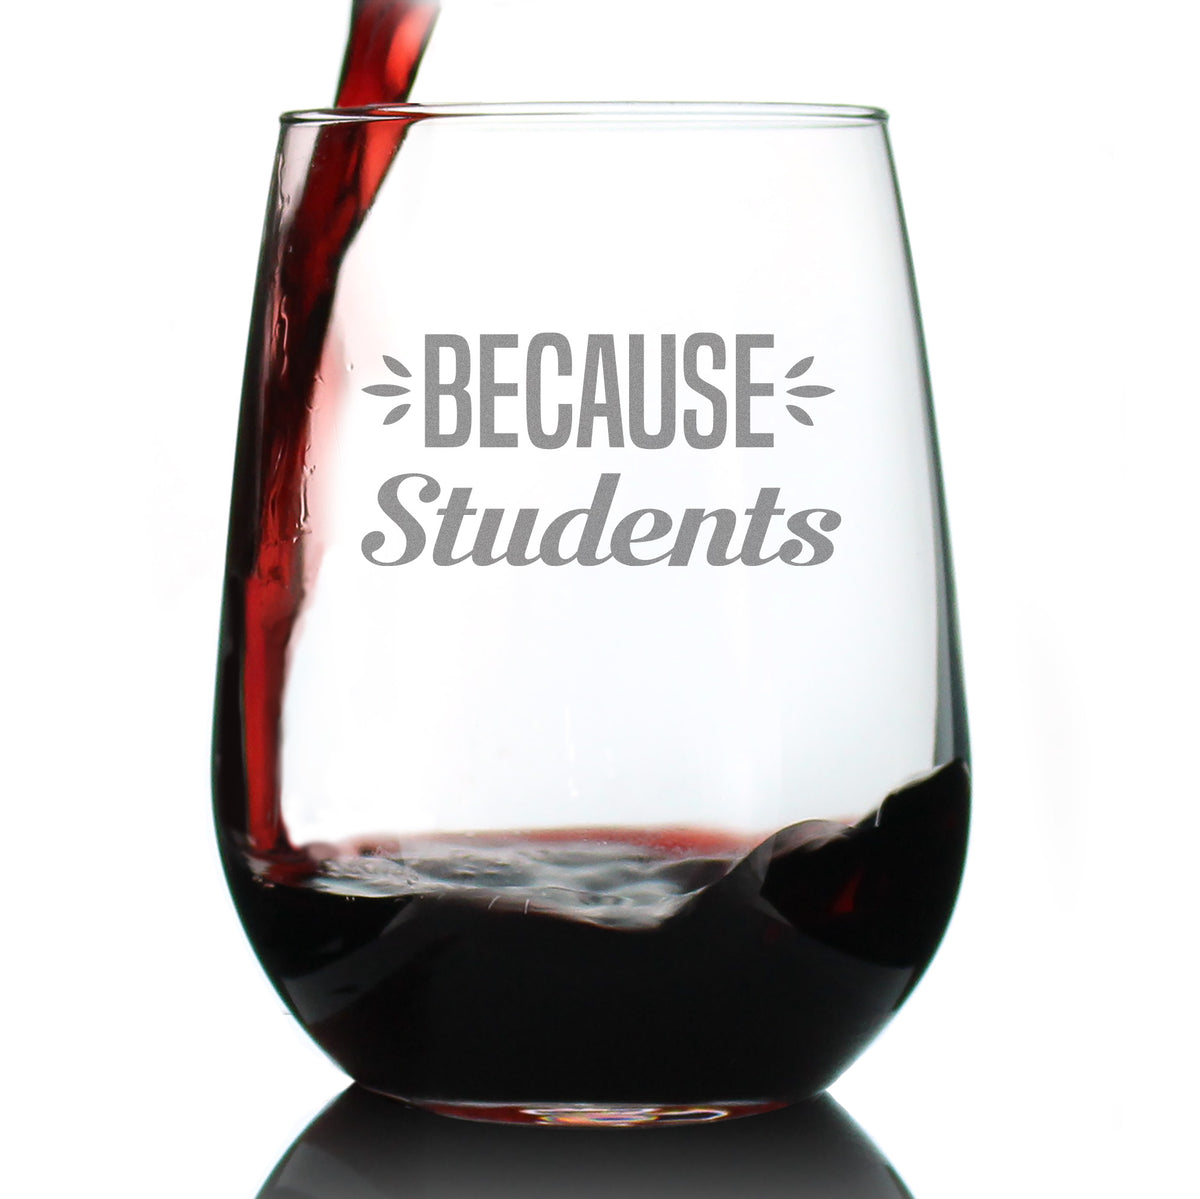 Because Students – Cute Funny Stemless Wine Glass, Large 17 Oz Size, Etched Sayings, Teacher Gift